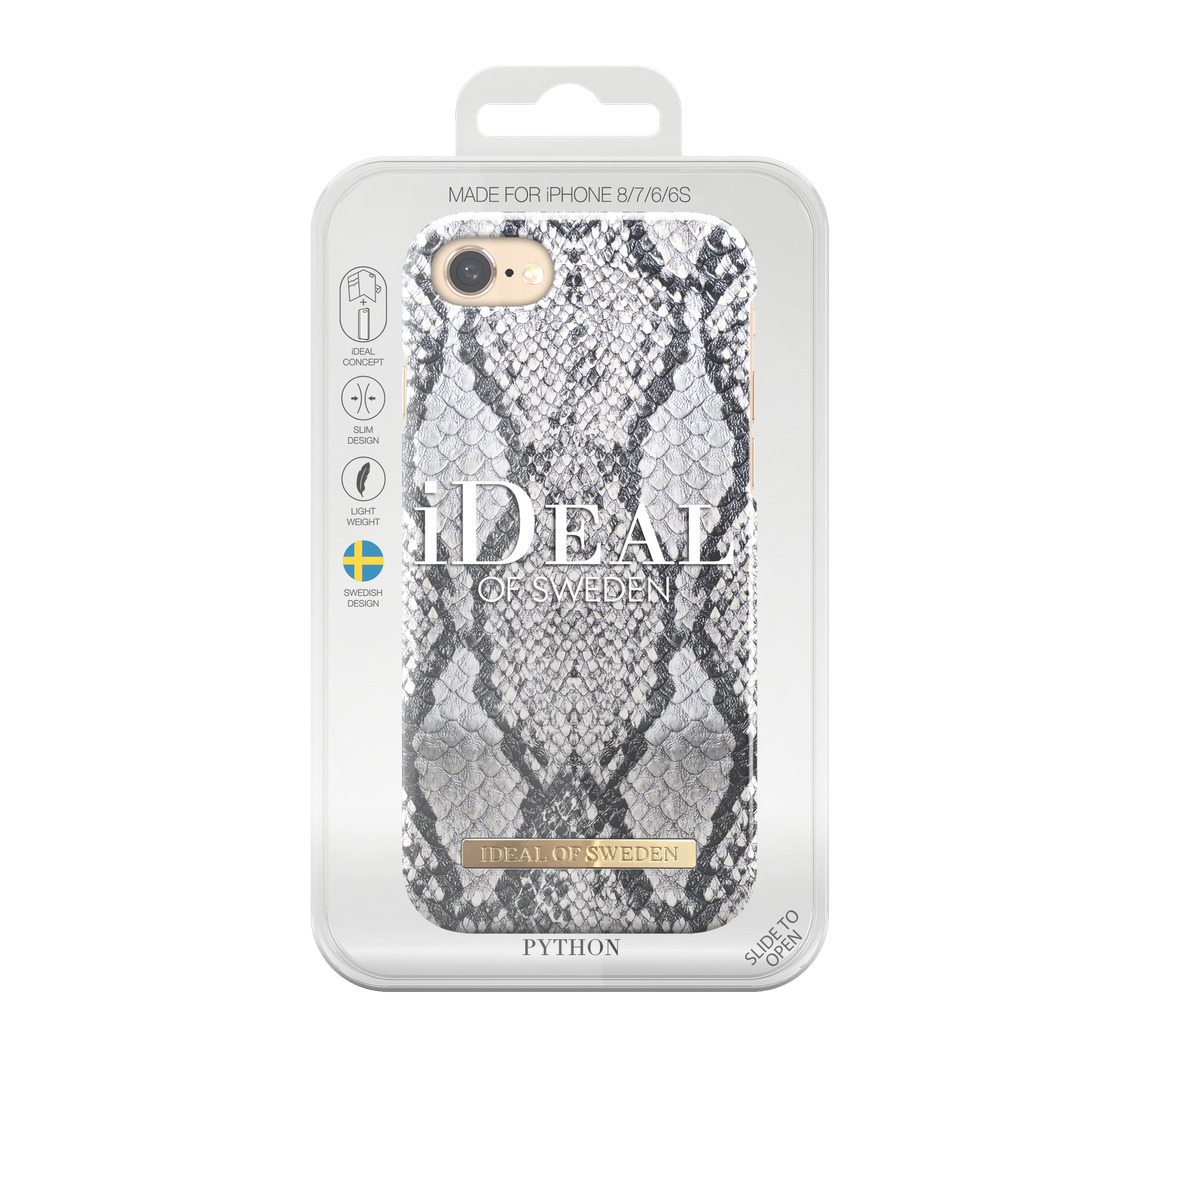 OF Backcover, SWEDEN Apple, iPhone IDEAL iPhone 8, 6, Fashion, Python iPhone 7,